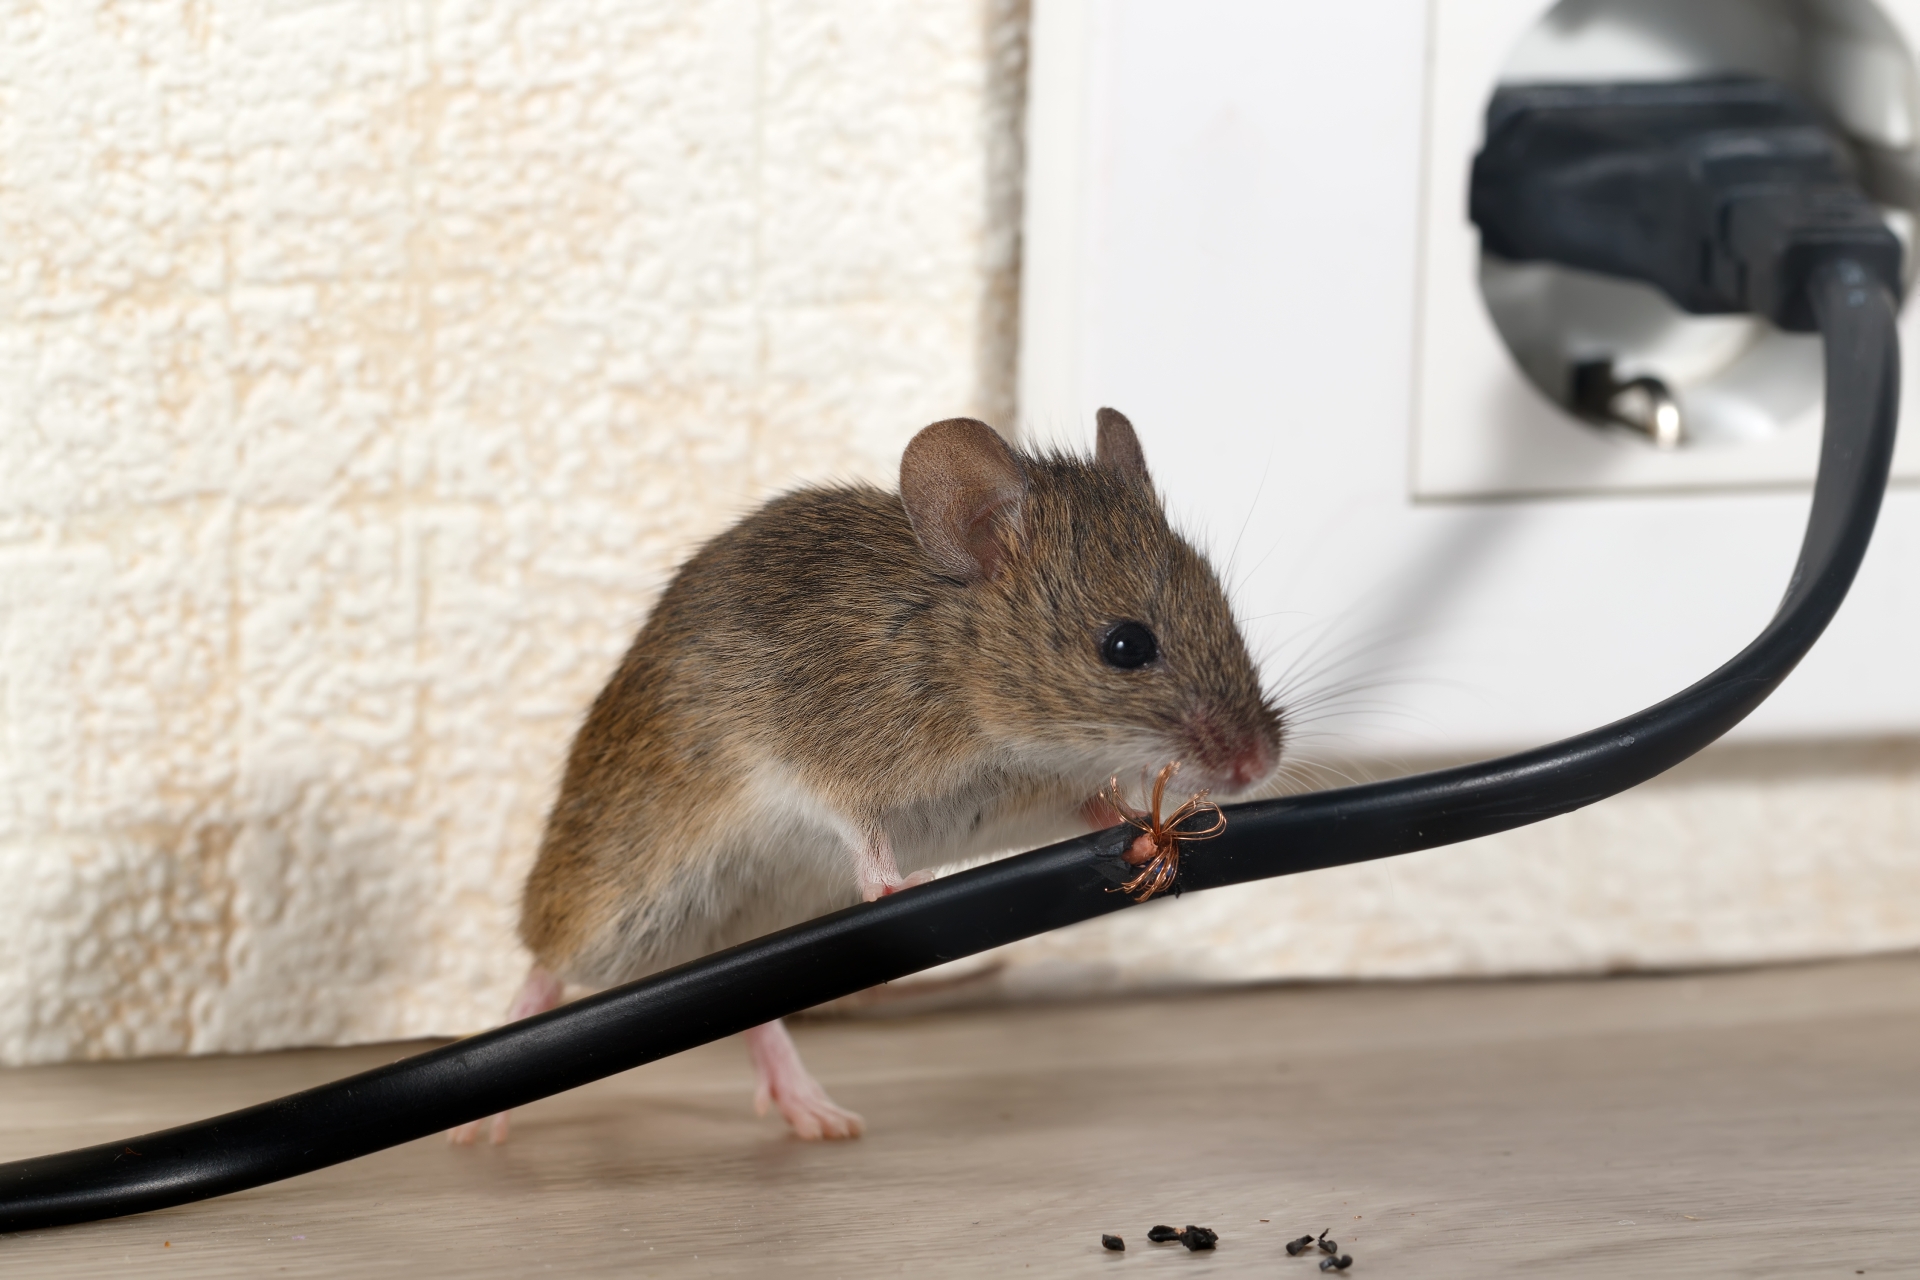 Mice Infestation, Pest Control in Muswell Hill, N10. Call Now 020 8166 9746